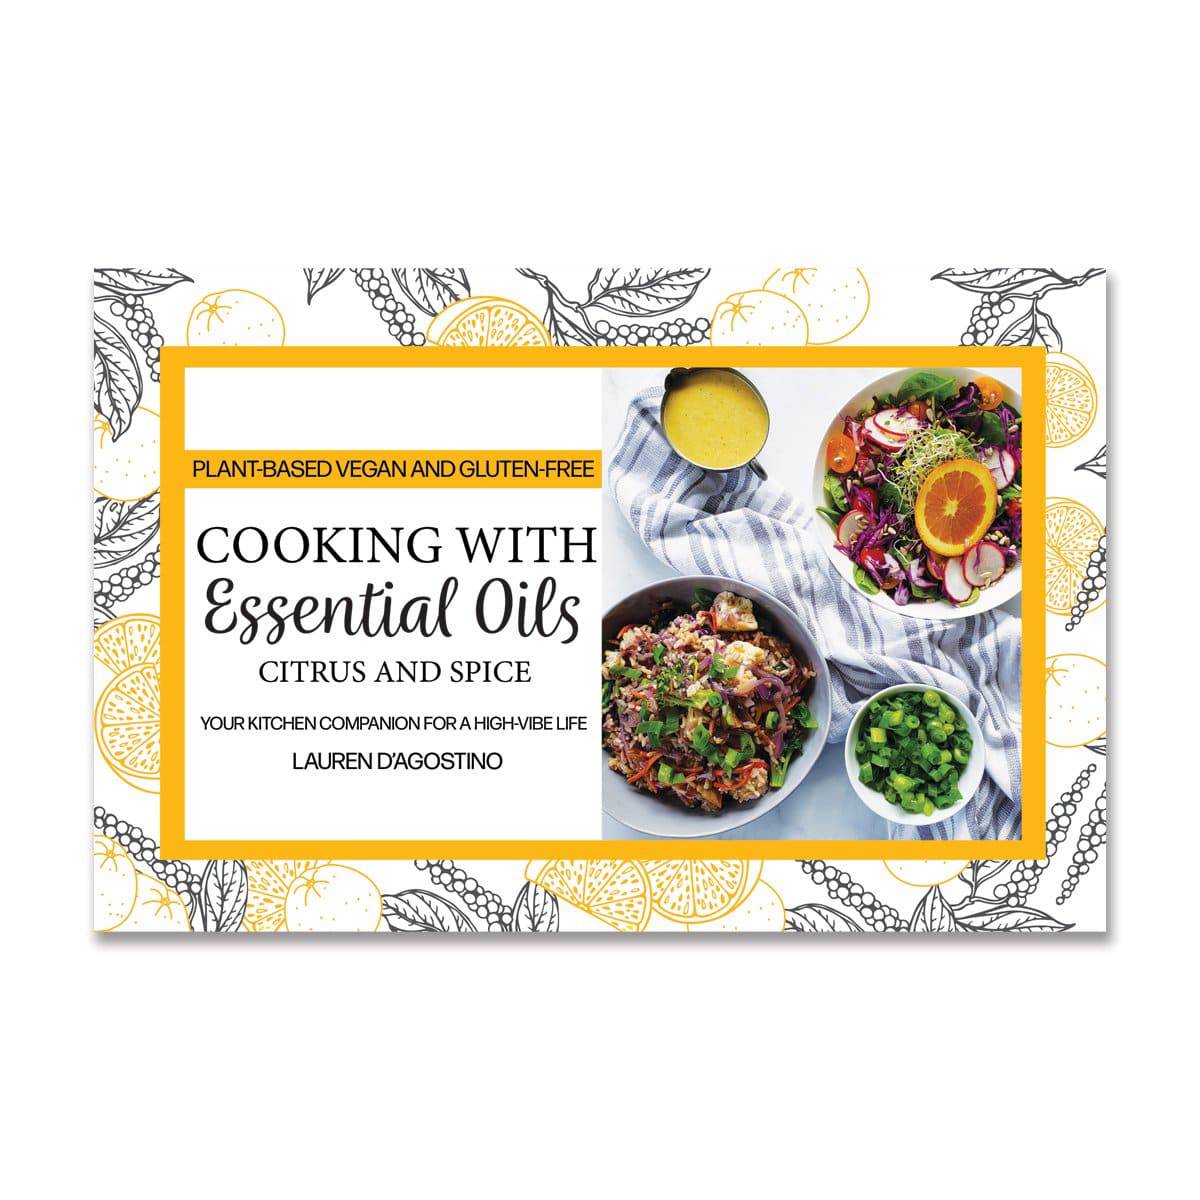 Cooking with Citrus and Spice Cookbook - Your Oil Tools